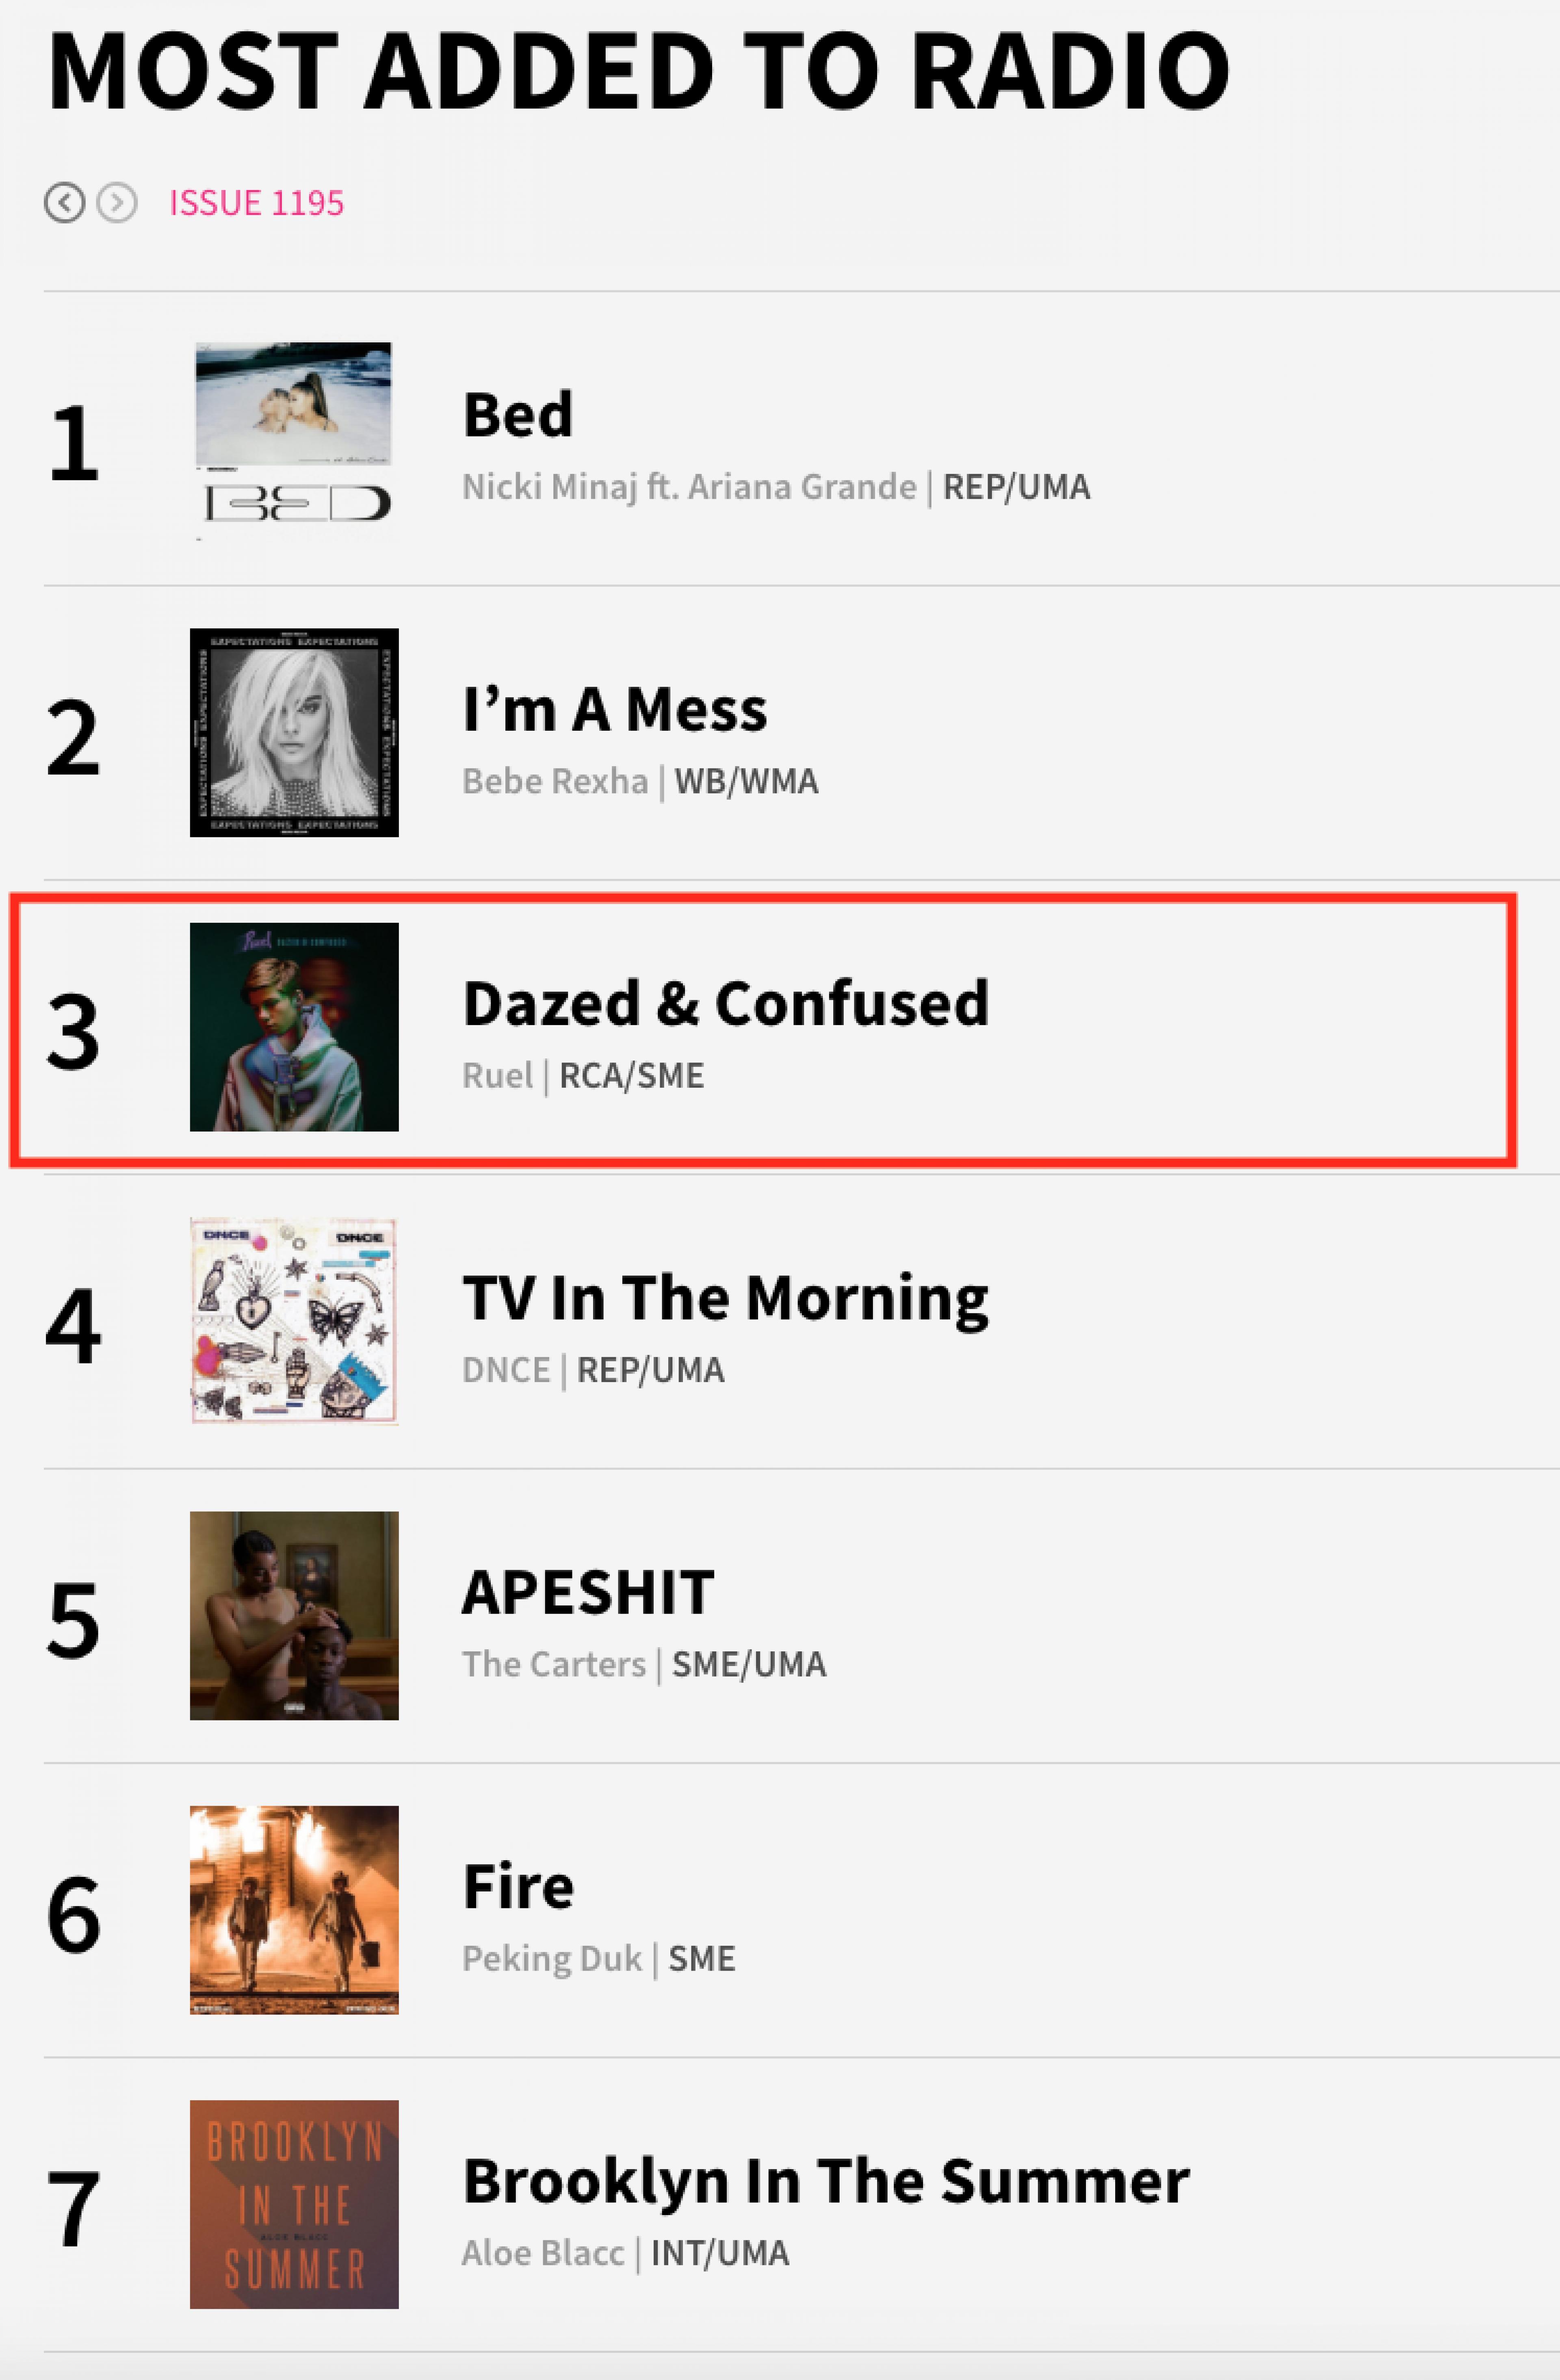 Ruel's new single 'Dazed & Confused' is the 3rd 'Most Added' song on Australian Radio